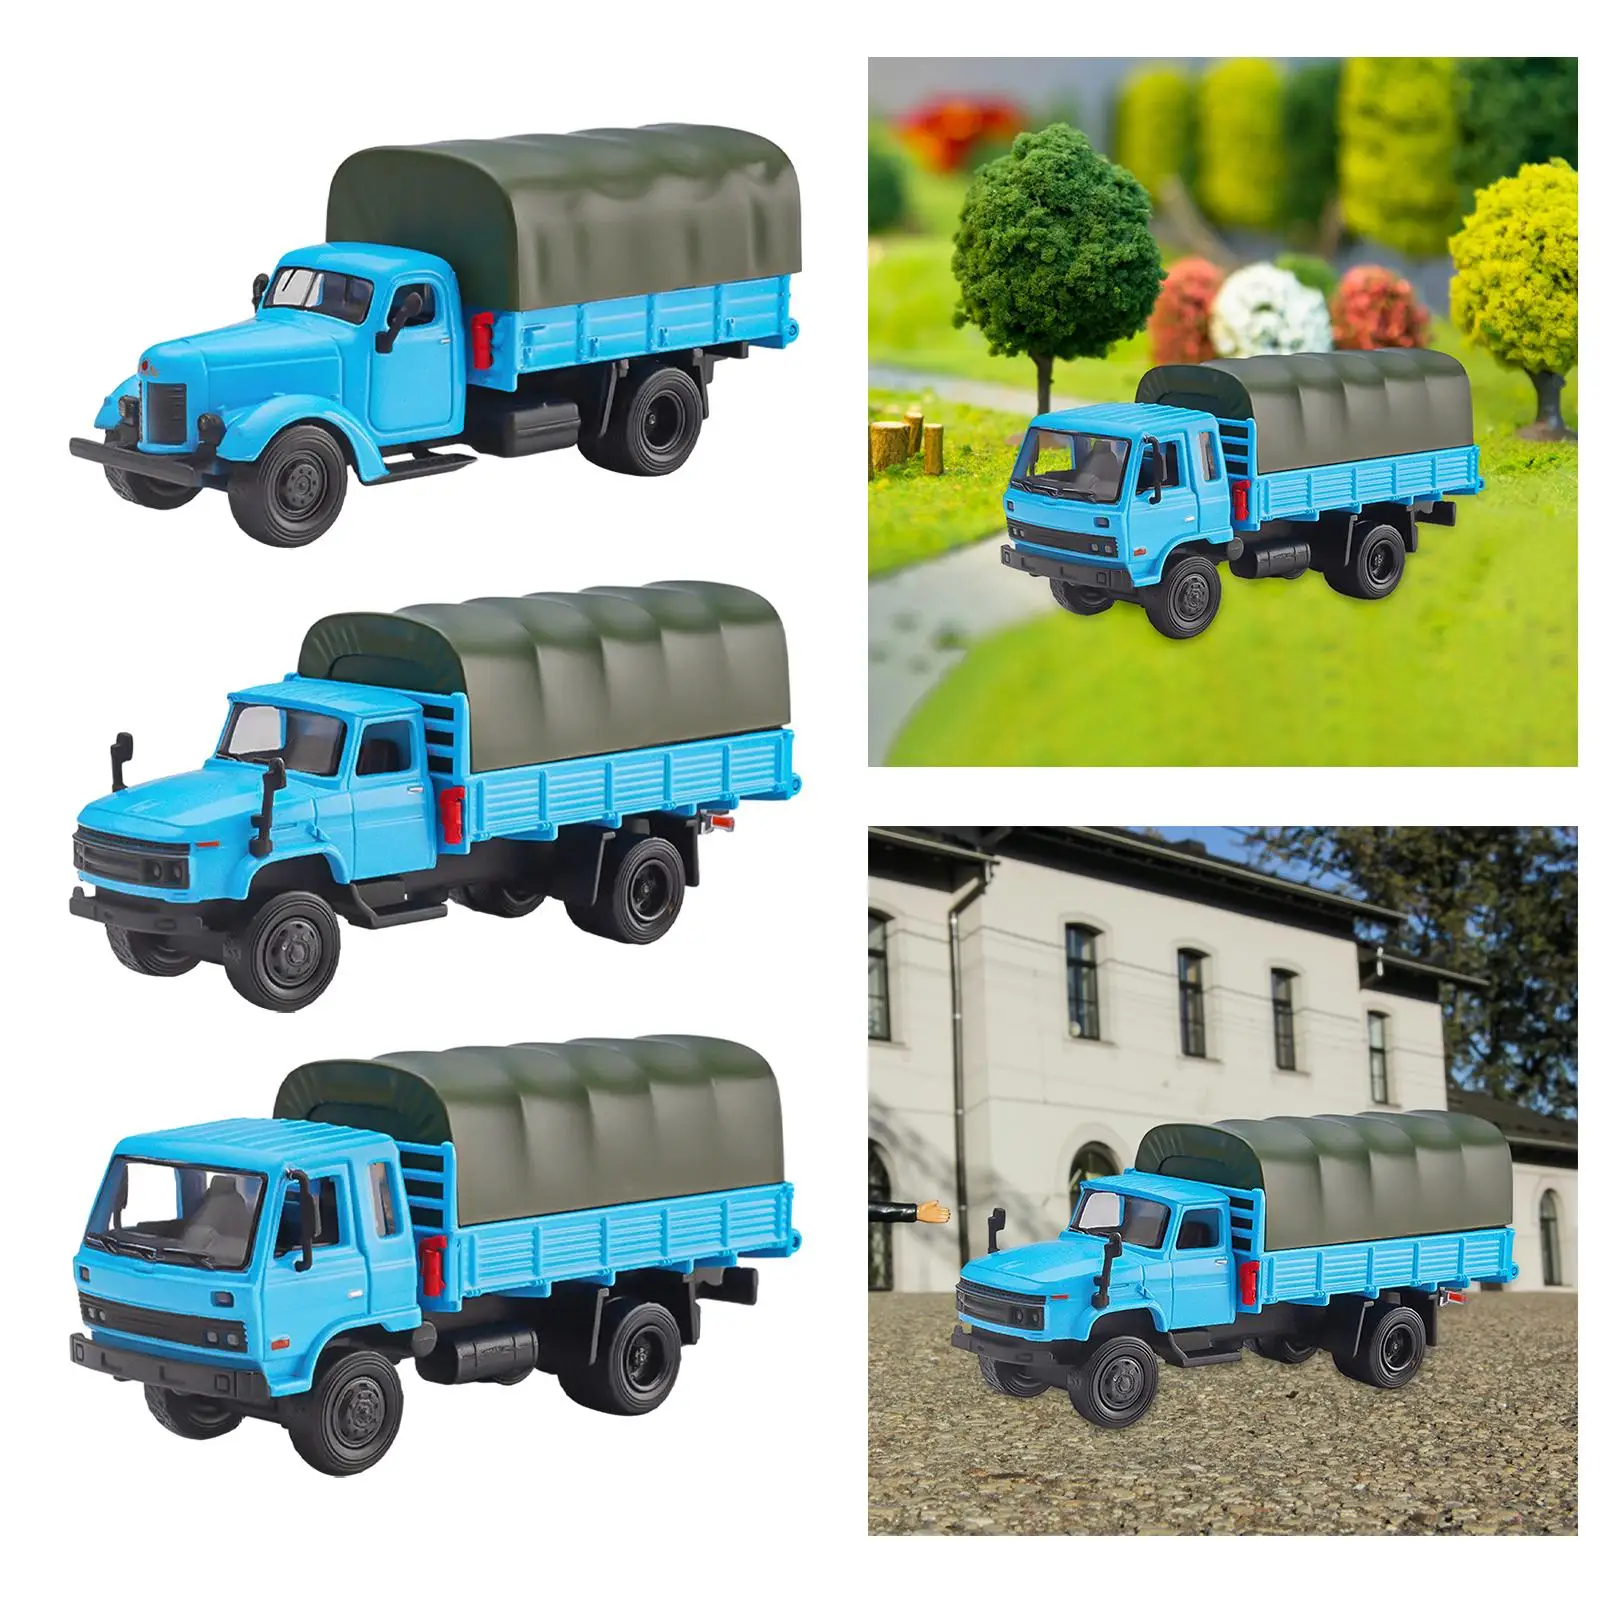 1/64 Transport Vehicle Diorama Scenery Model Car for Kids Adults Decoration